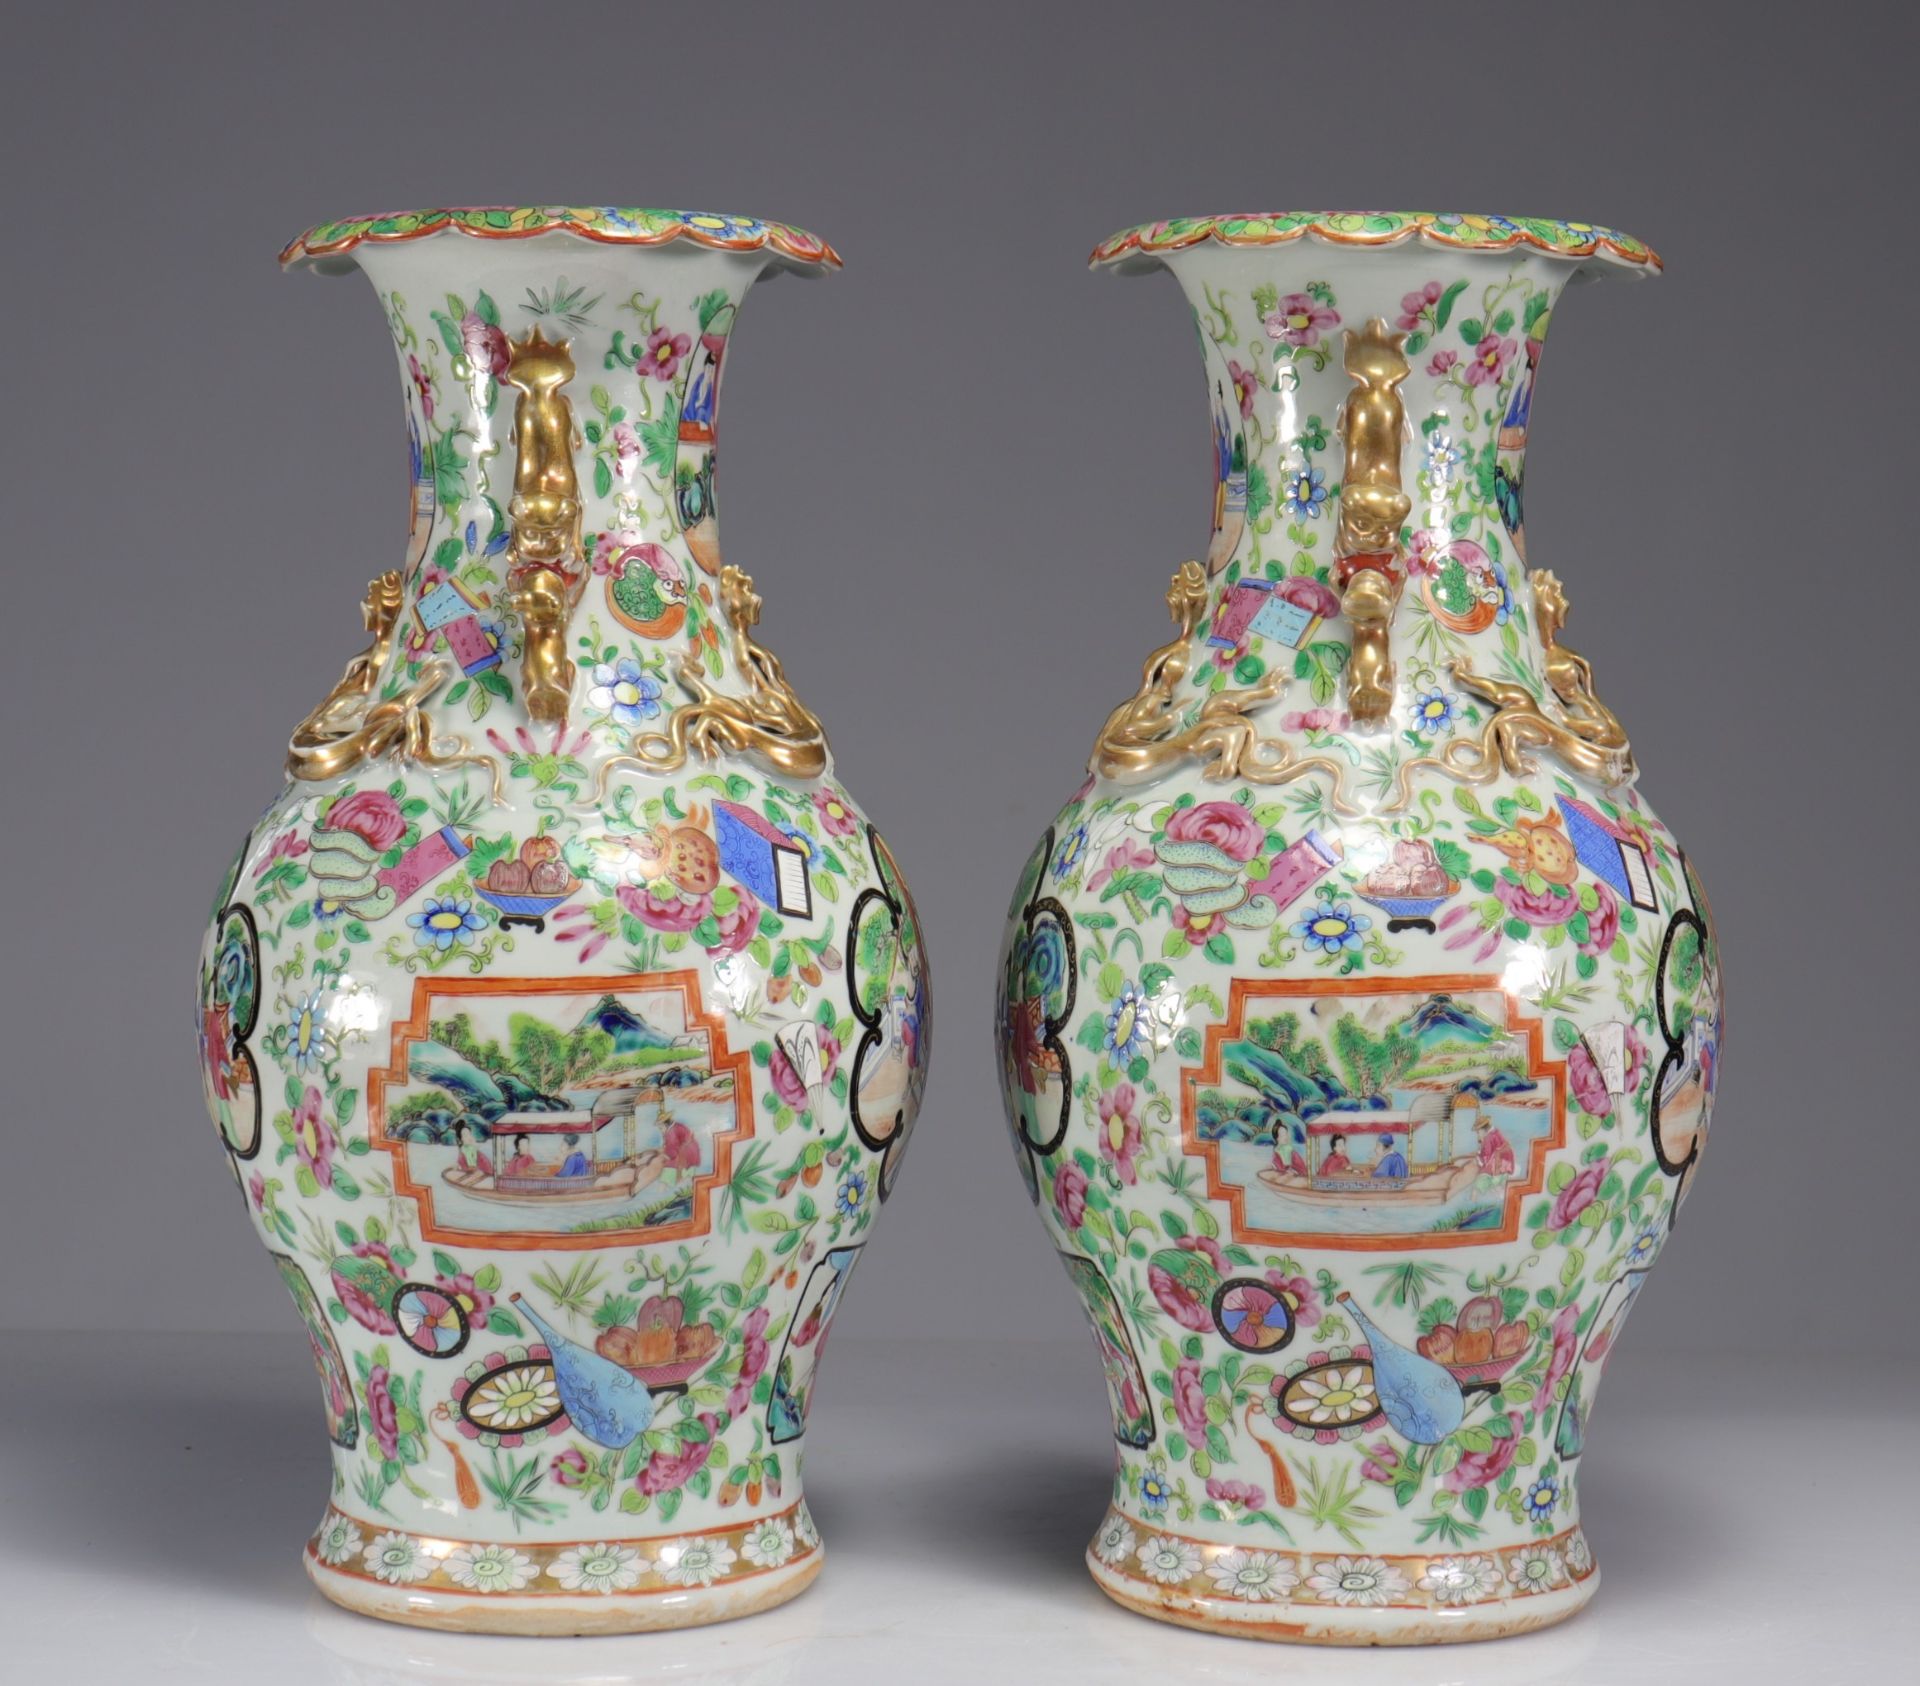 Pair of 19th century Canton porcelain vases - Image 2 of 6